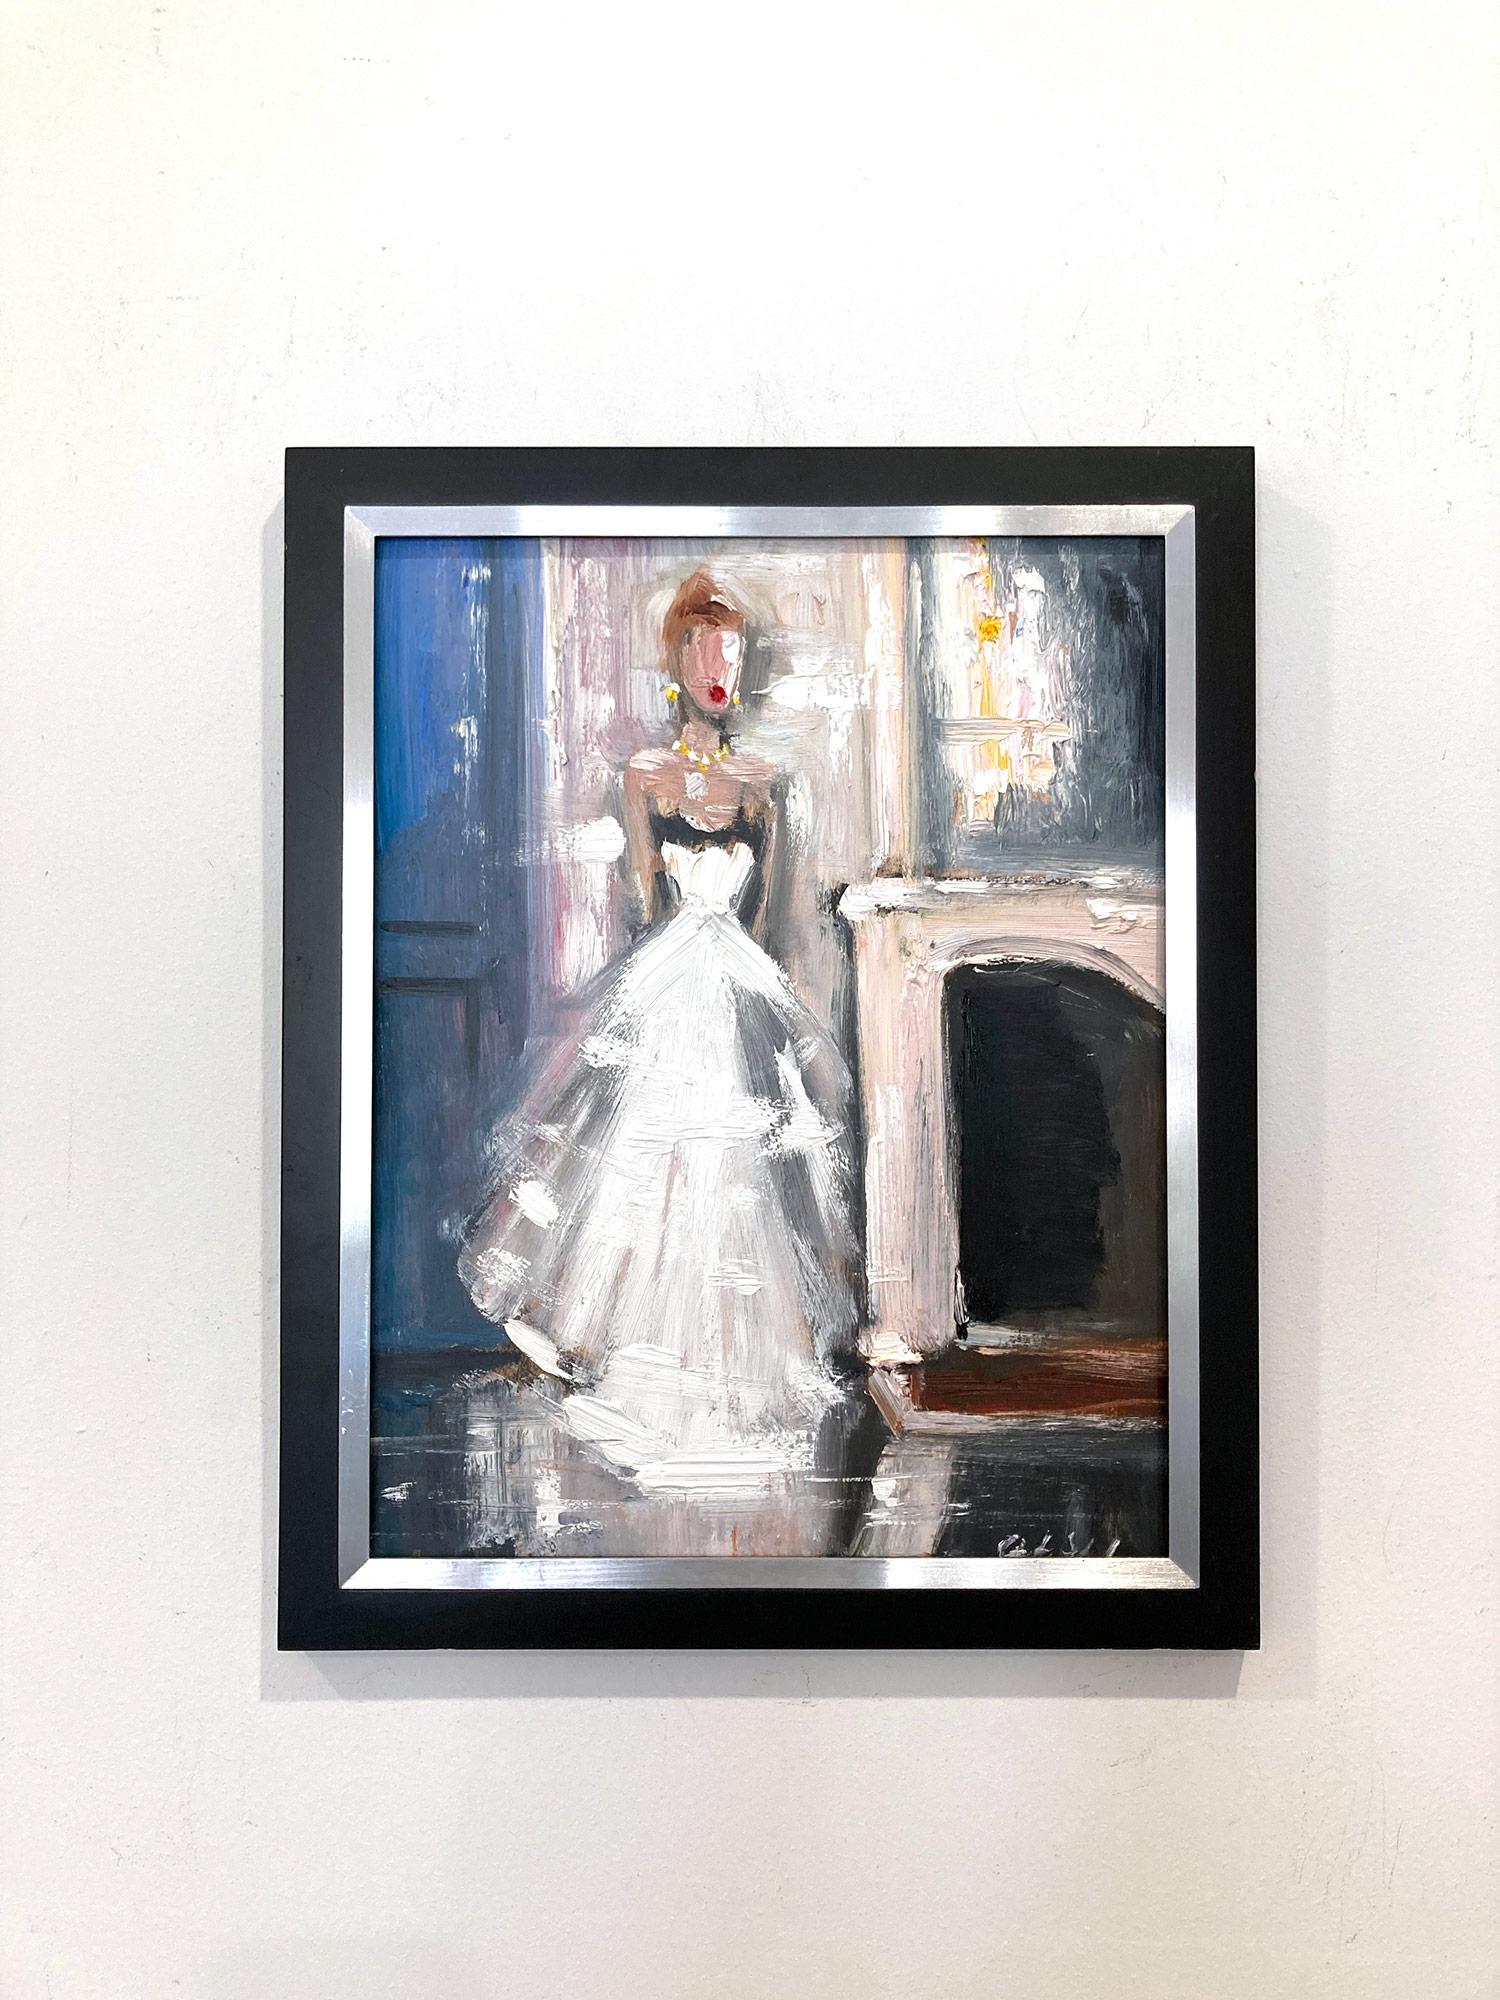 „As She Glimmers“ Interieur Haute Couture in Chanel Impressionistisches Ölgemälde im Angebot 7